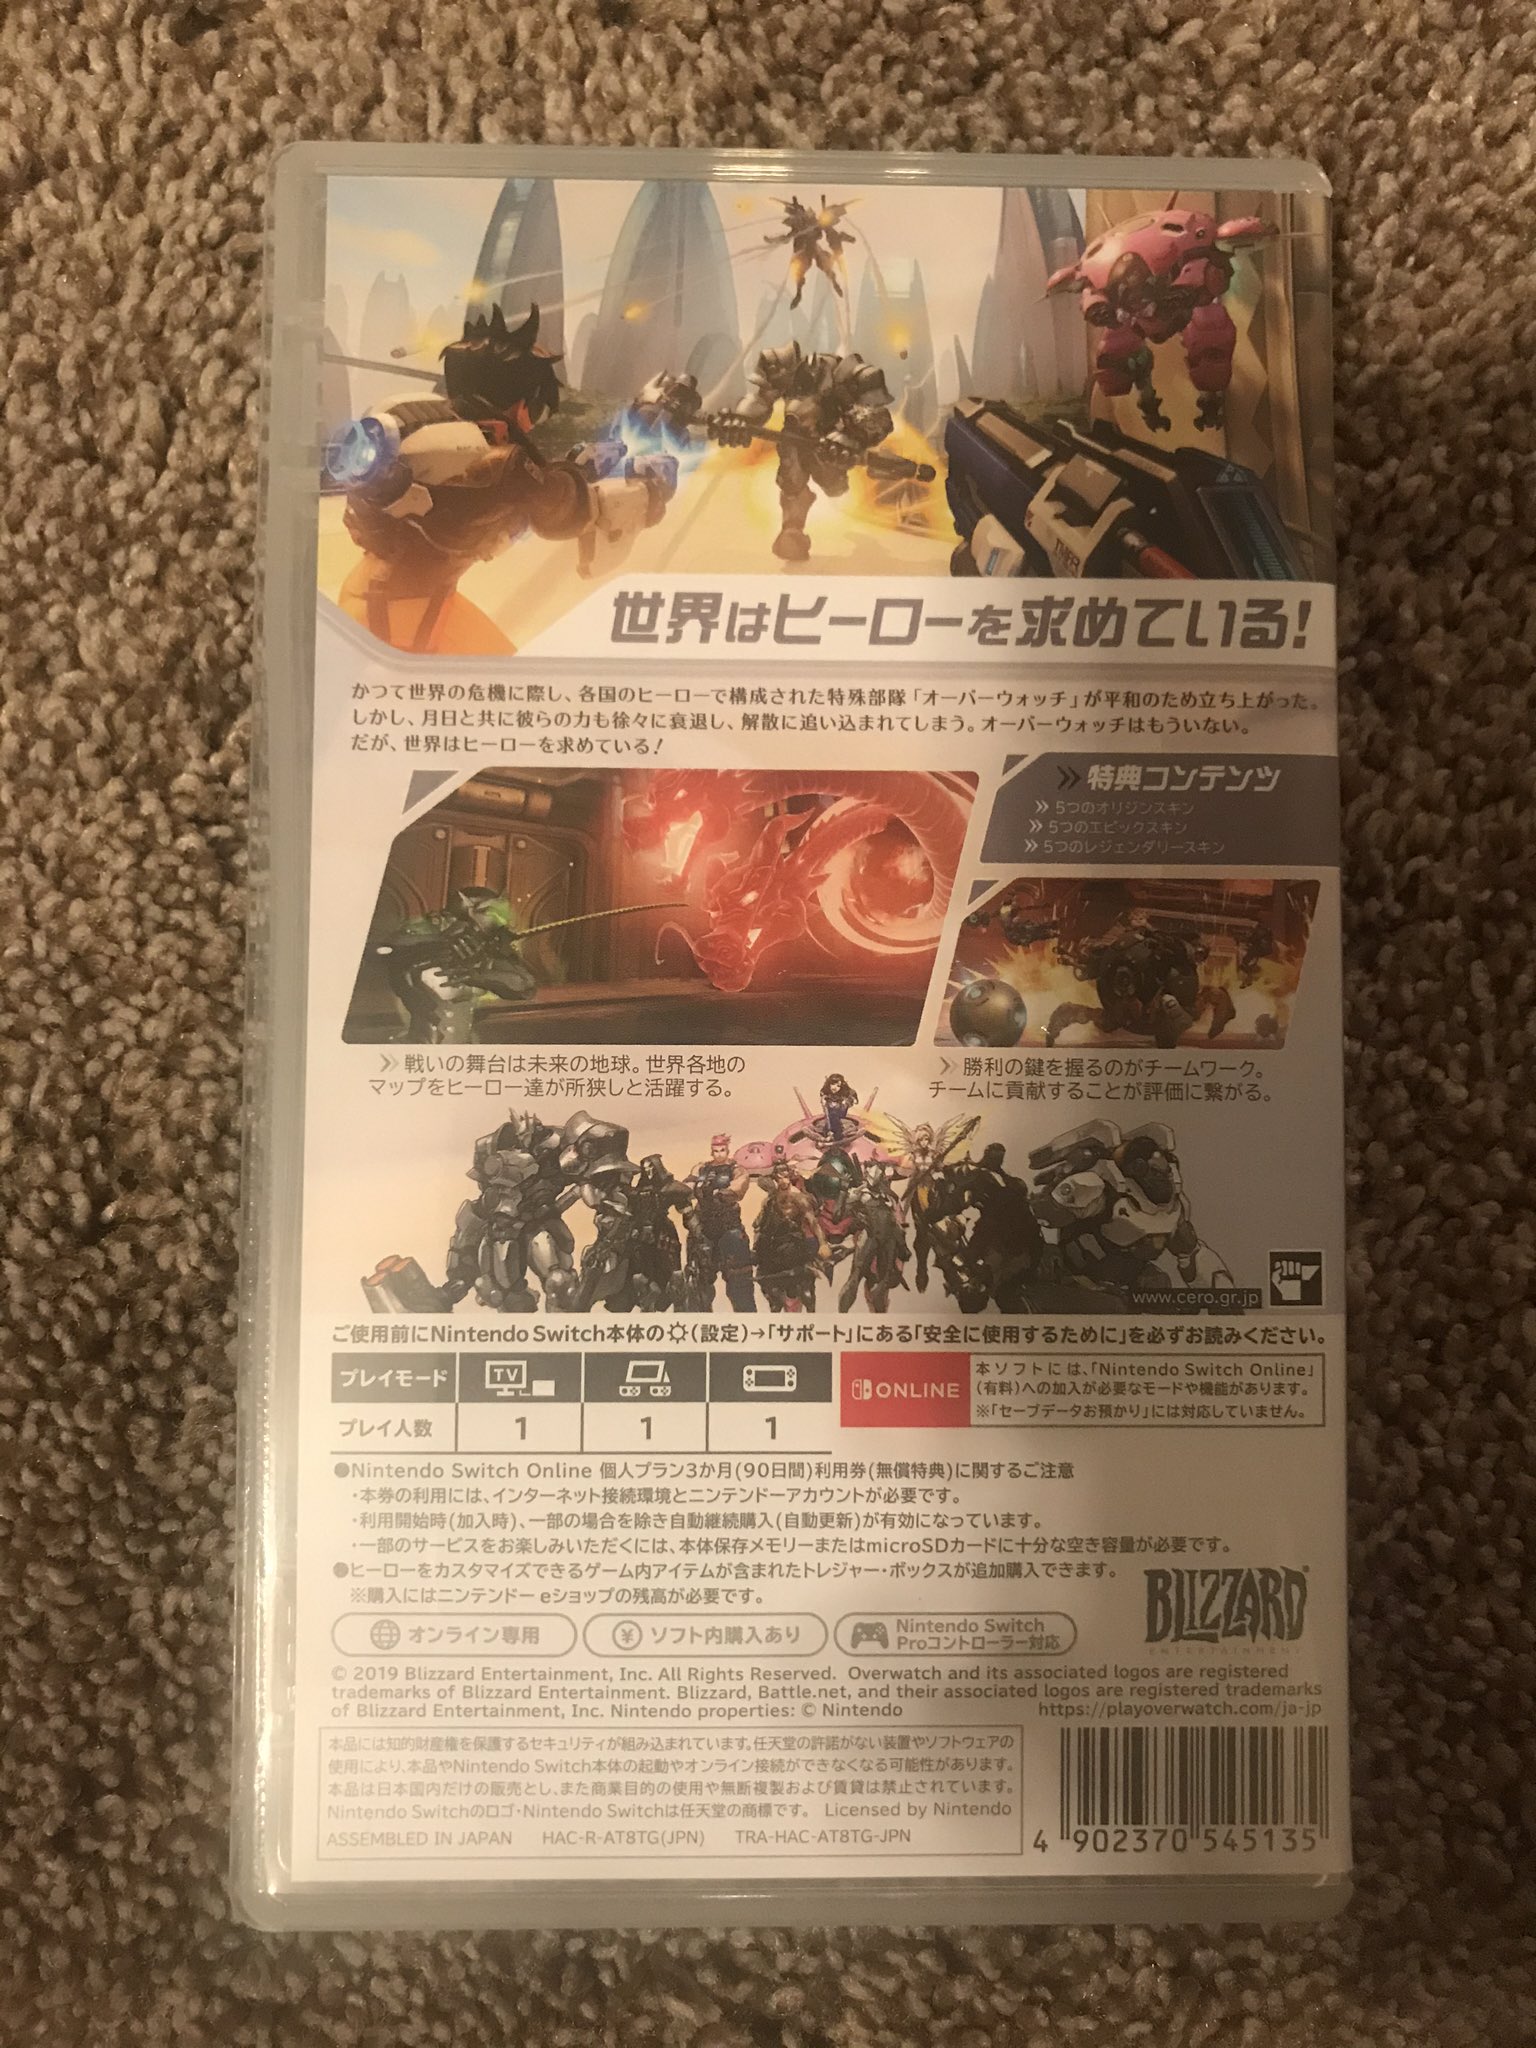 kone Boghandel uddybe First Look At Japan's Overwatch Switch Physical Edition – NintendoSoup